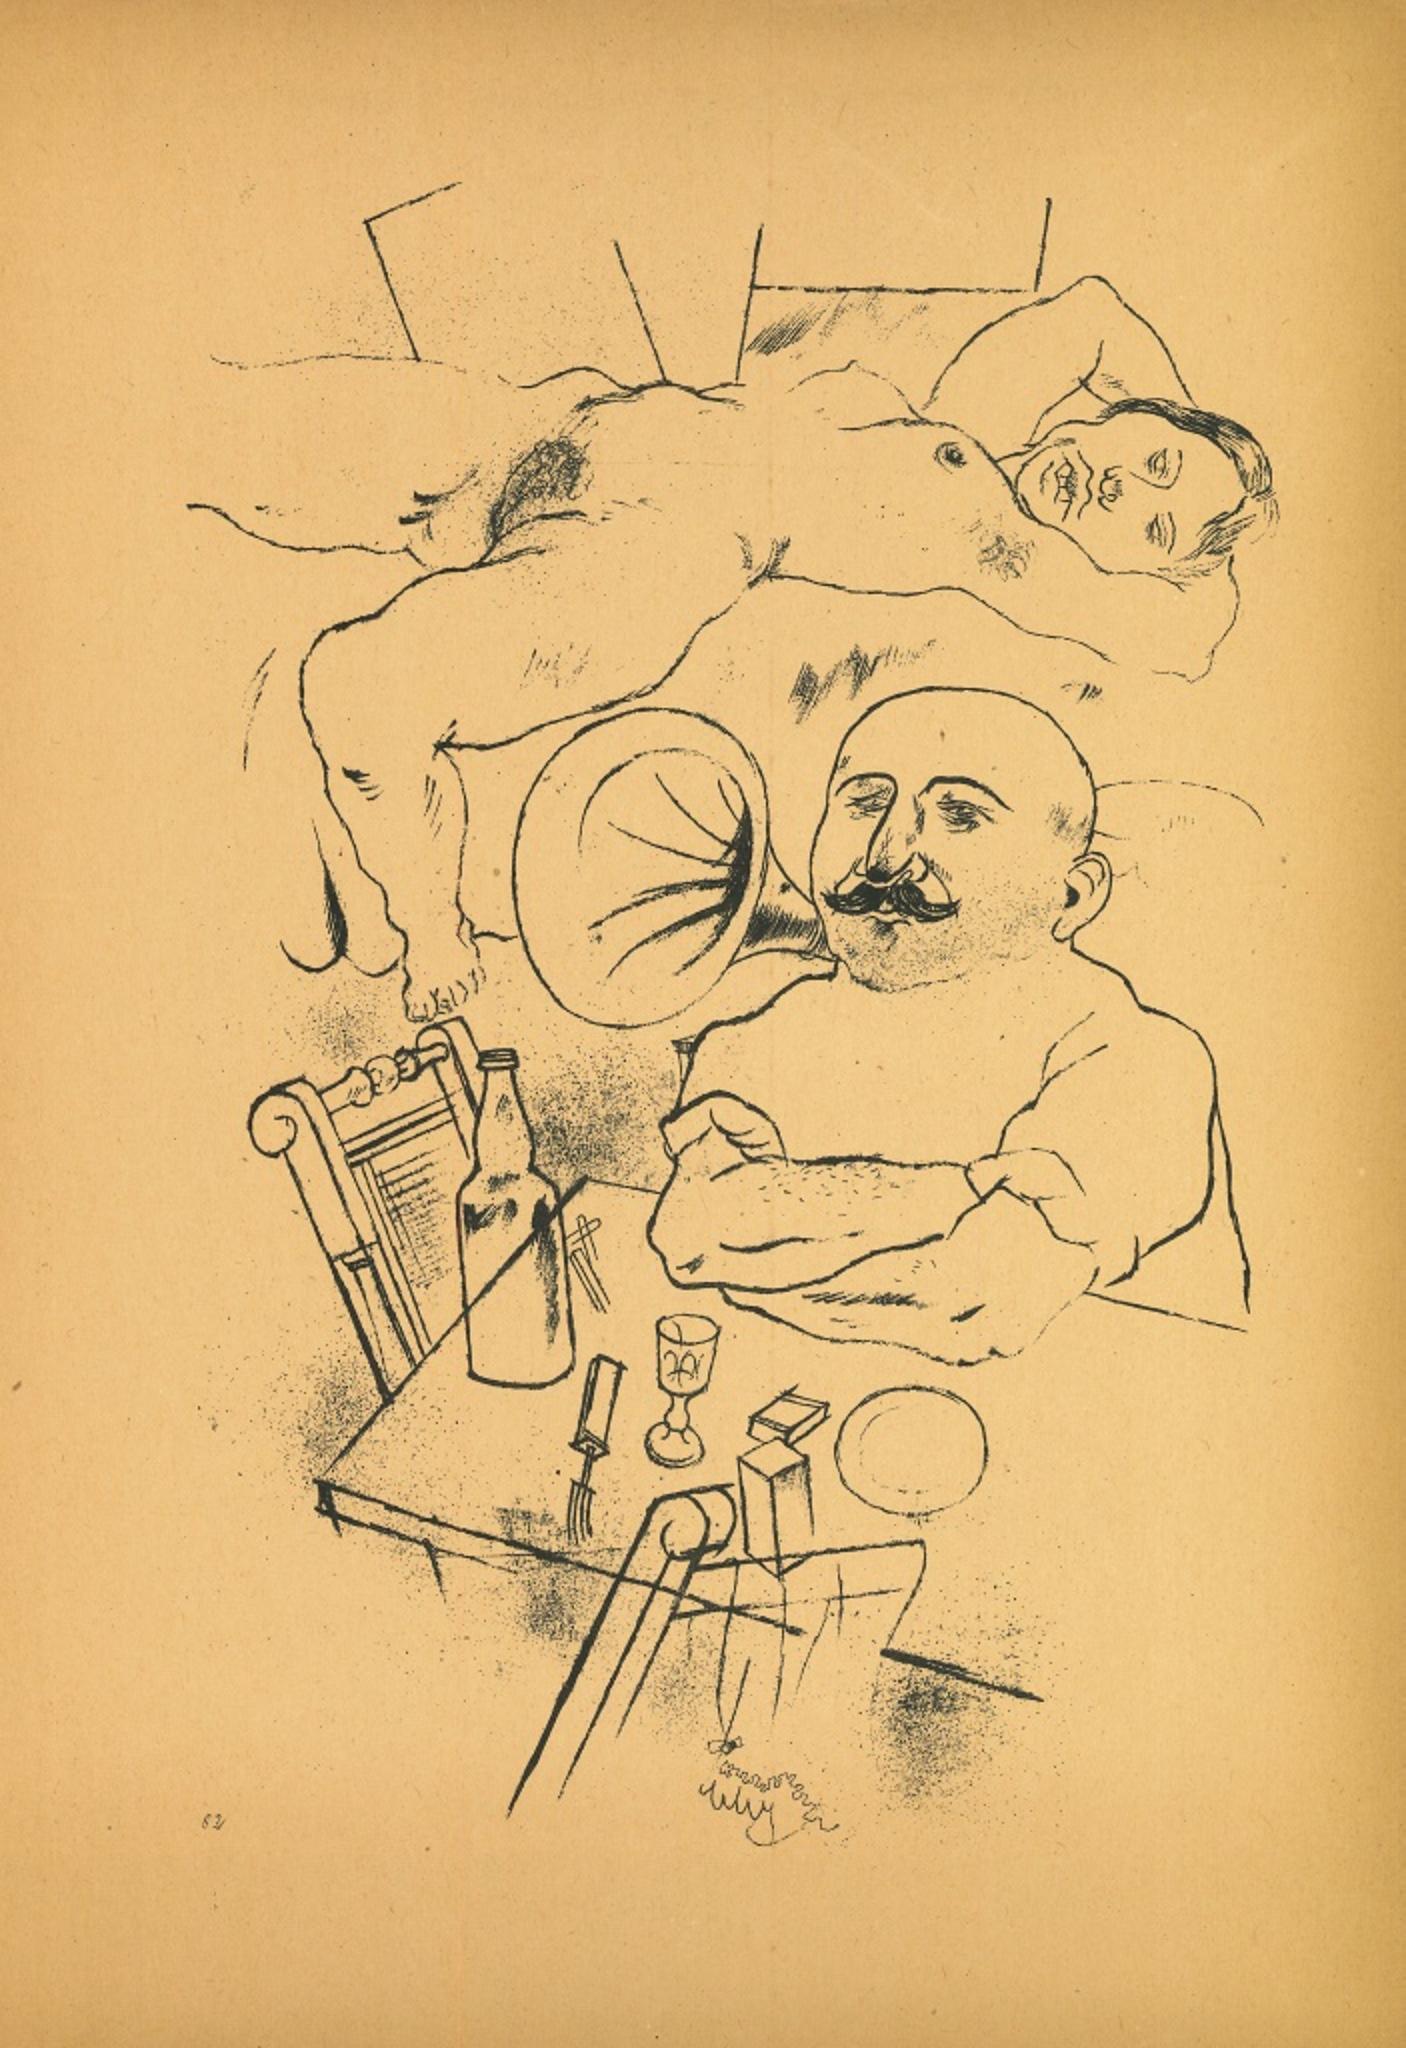 Dream - Offset and Lithograph by George Grosz - 1923